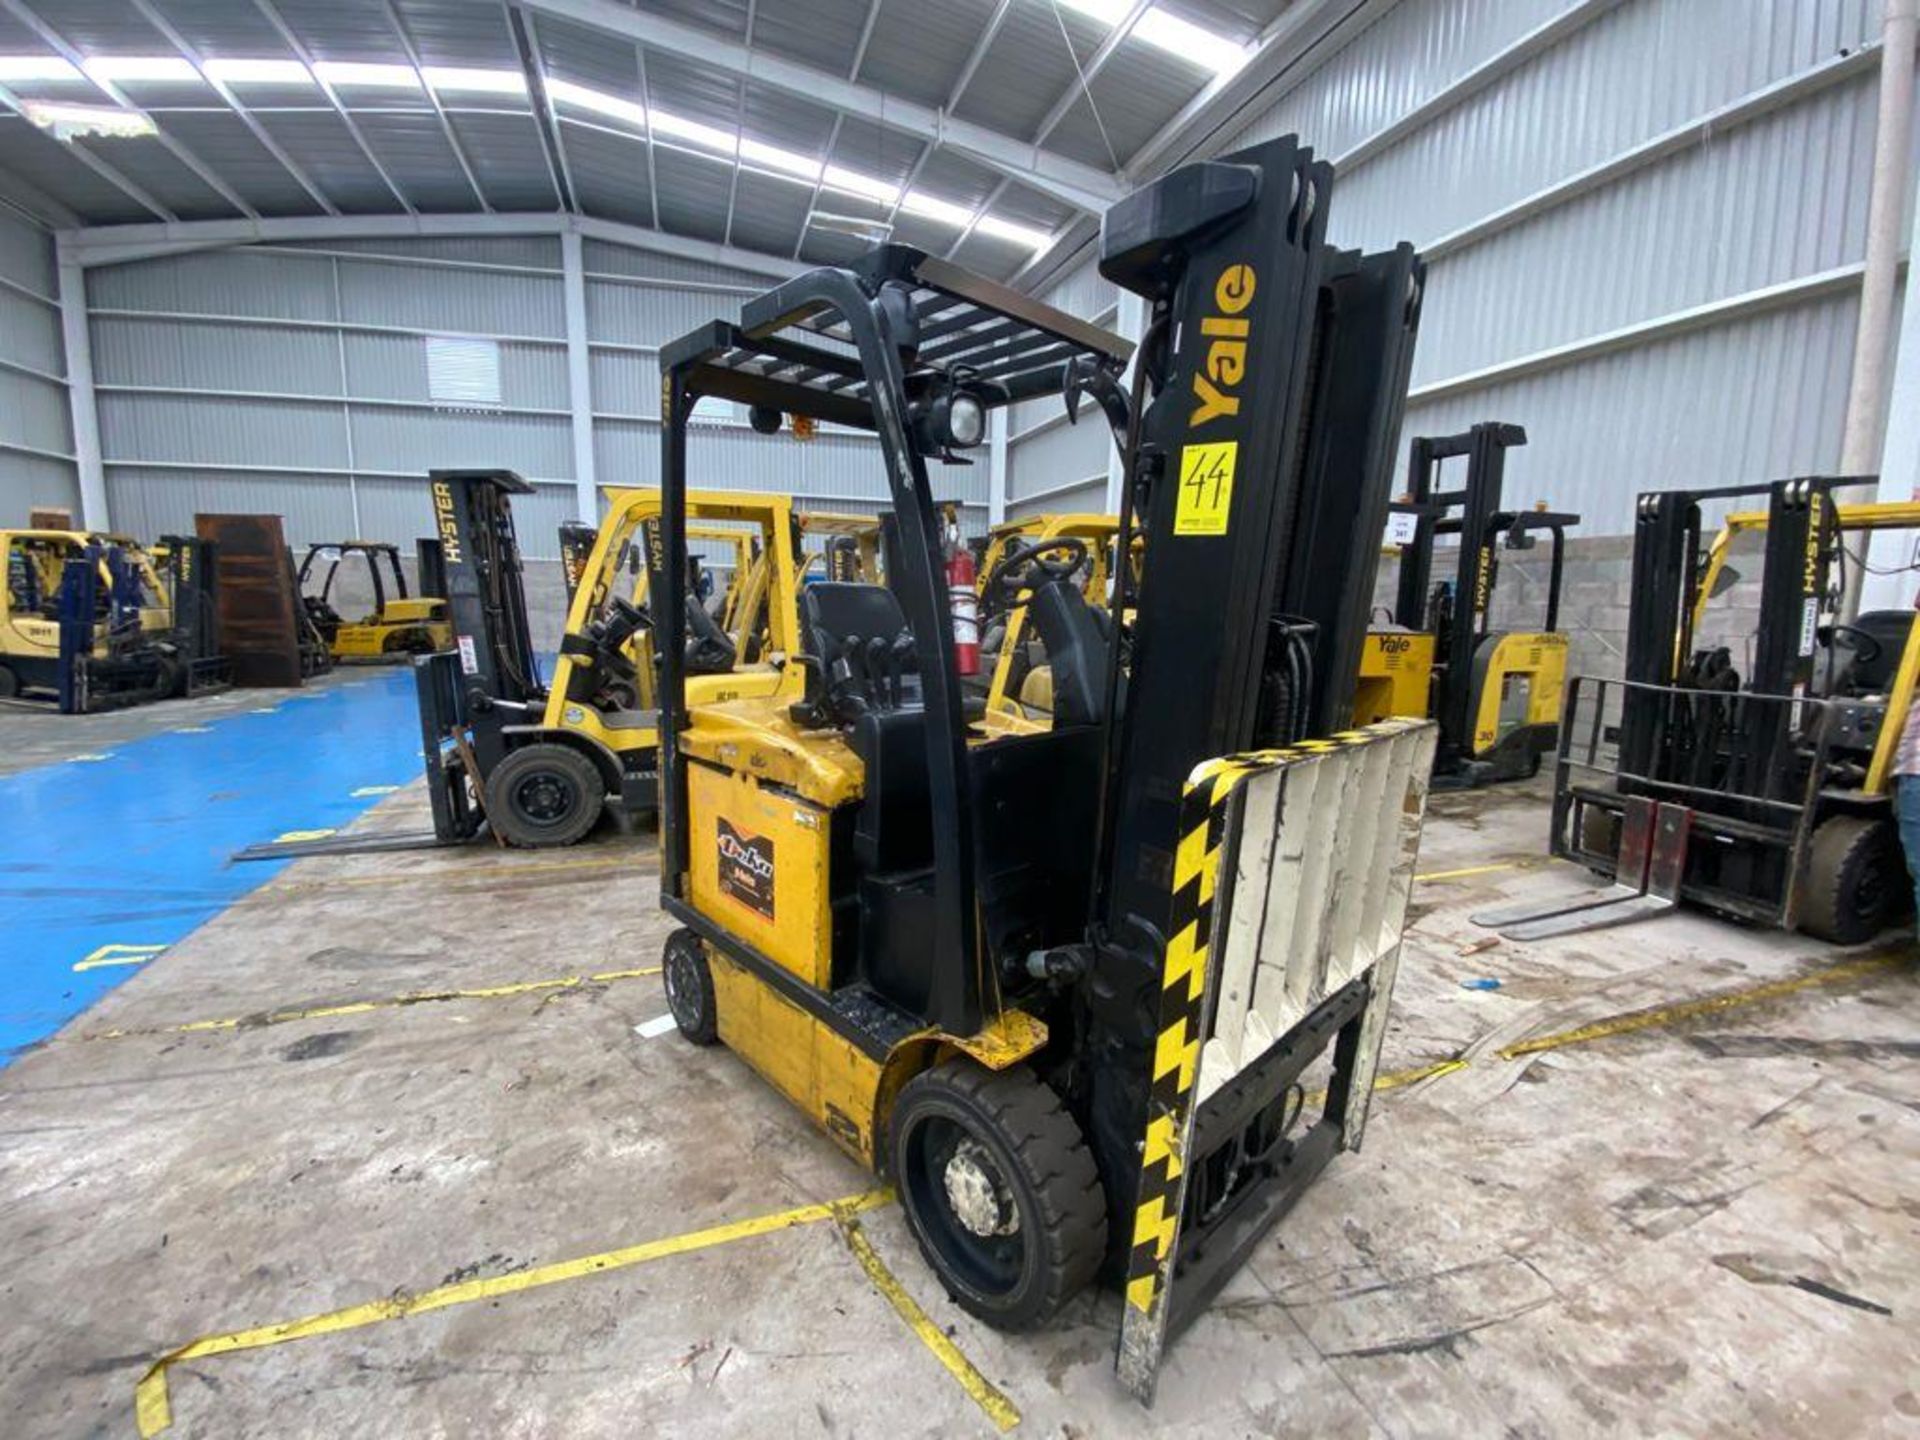 Yale Electric Forklift, Model ERC060VGN36TE088, S/N A968N17882R, Year 2017, 5800 lb capacity - Image 39 of 44